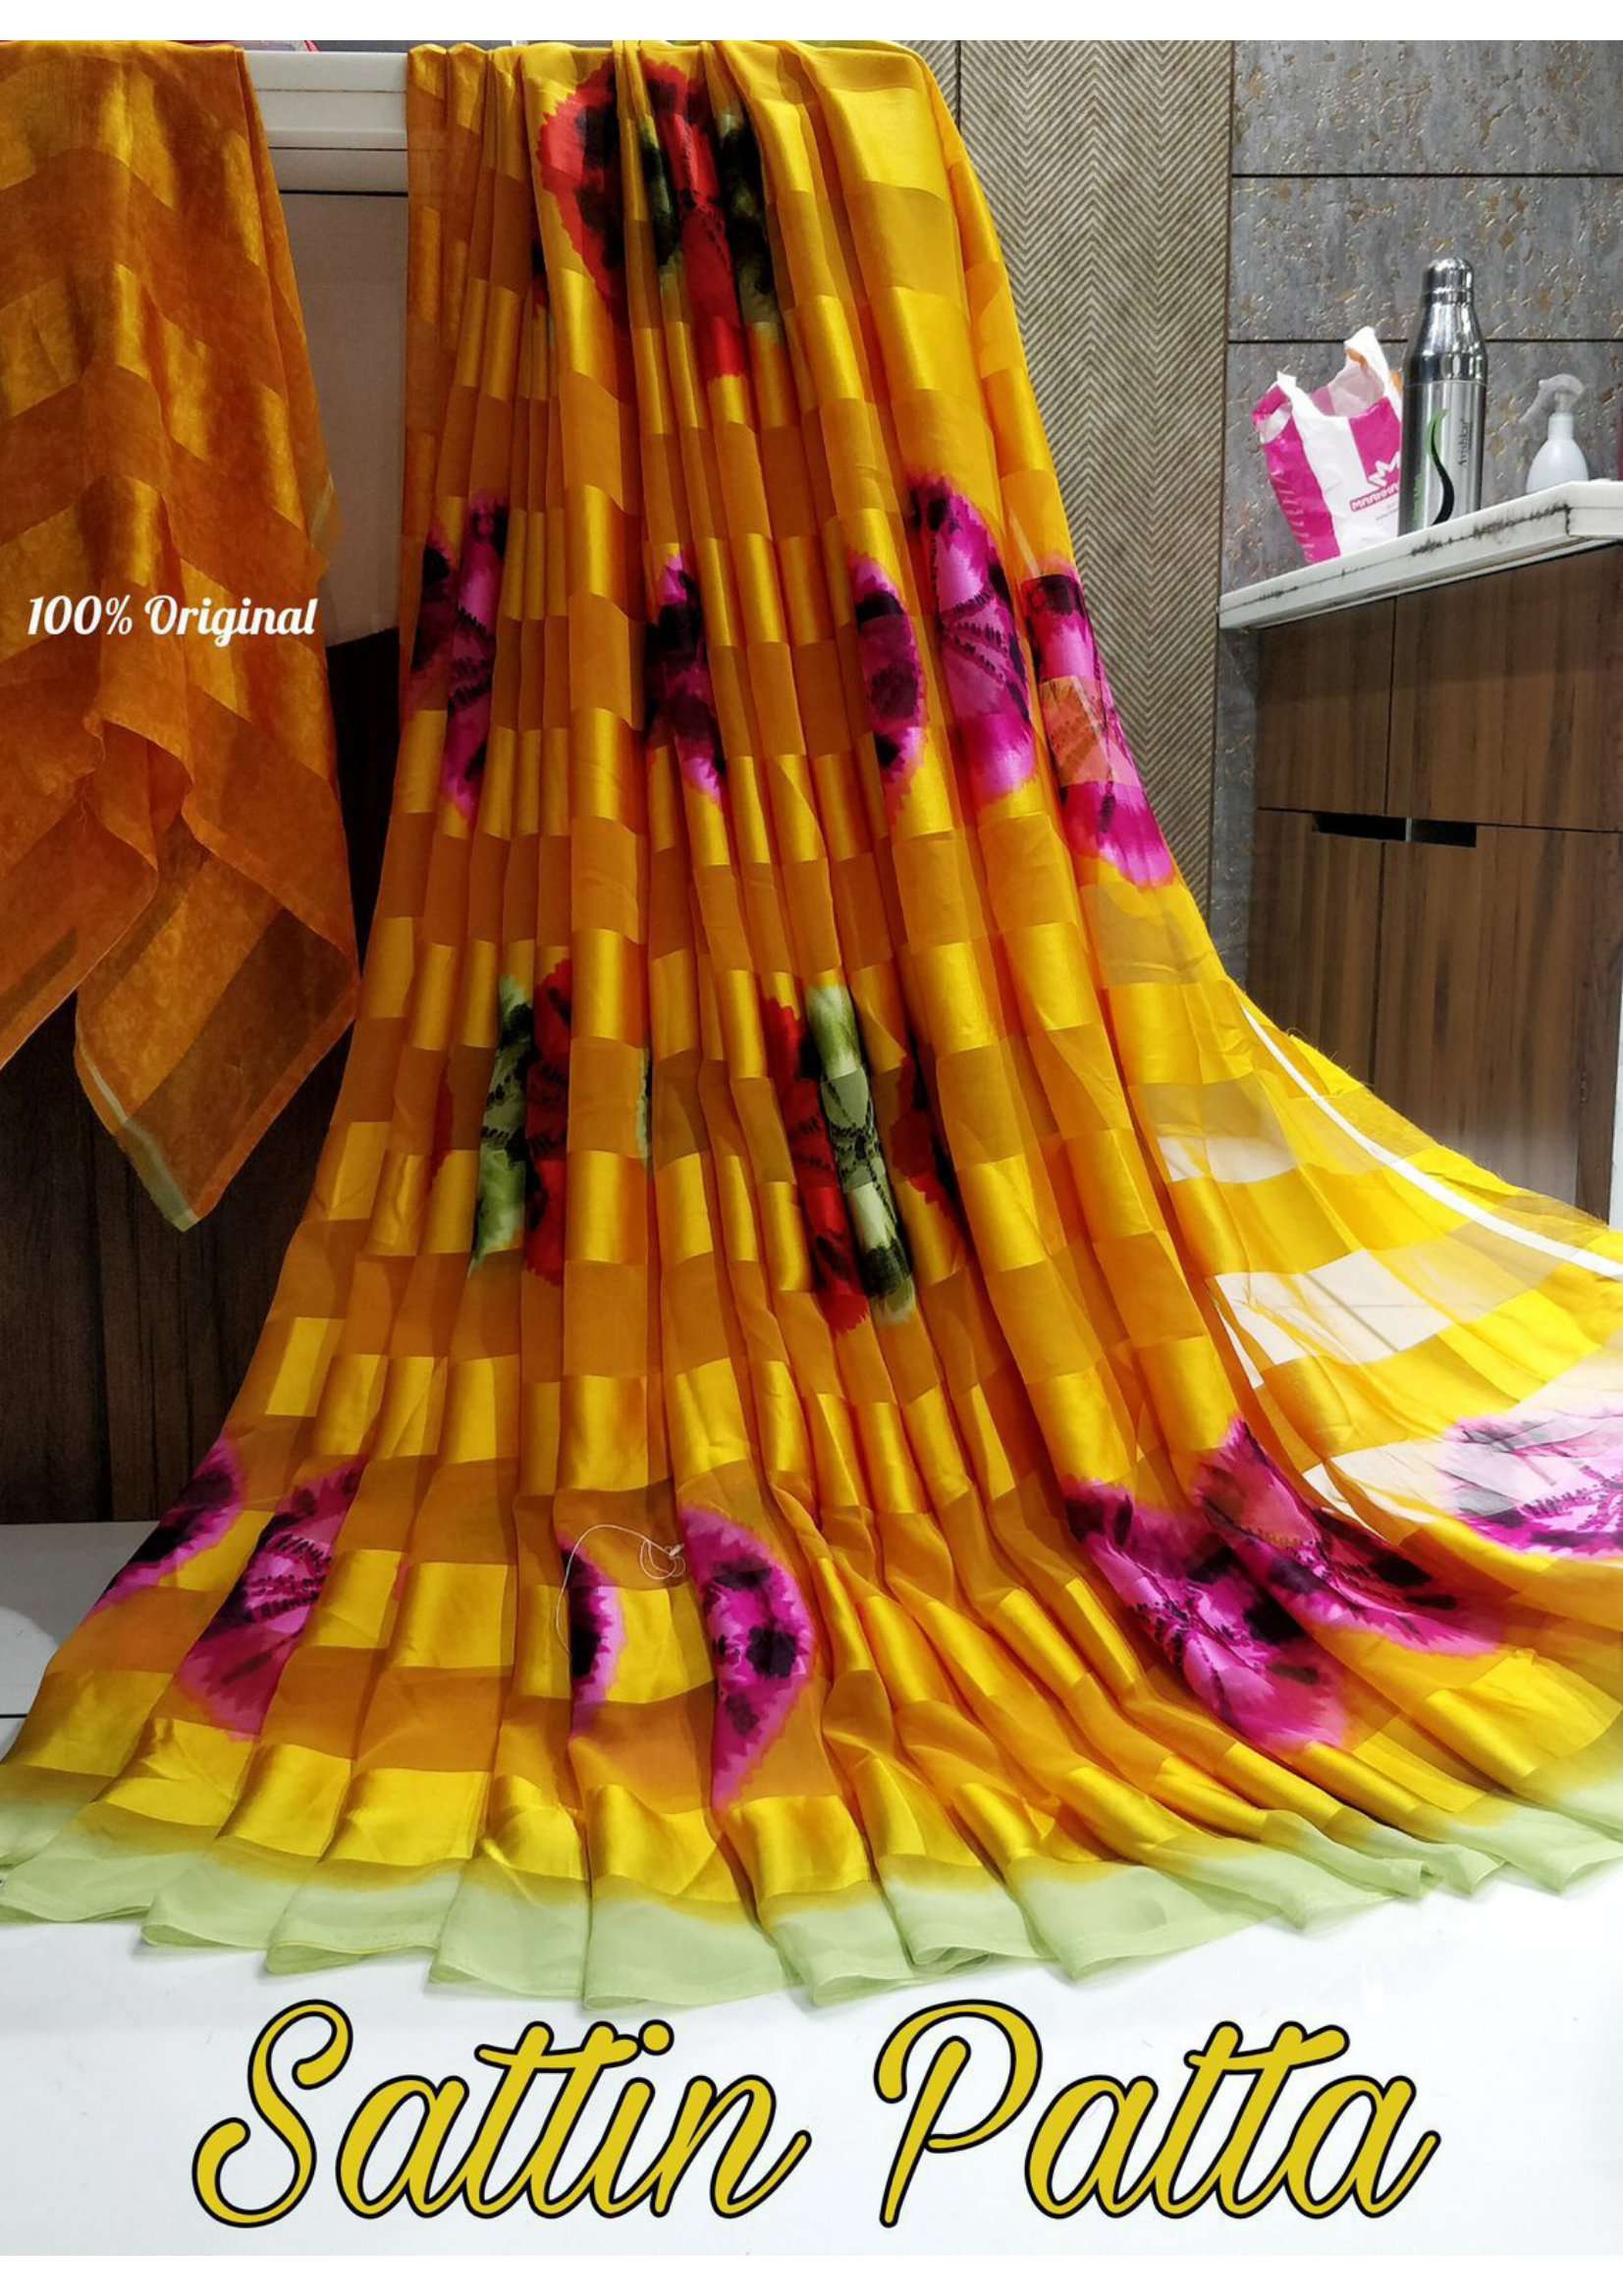 Silk Blend World & Traditional Sari/Sarees for Women for sale | eBay